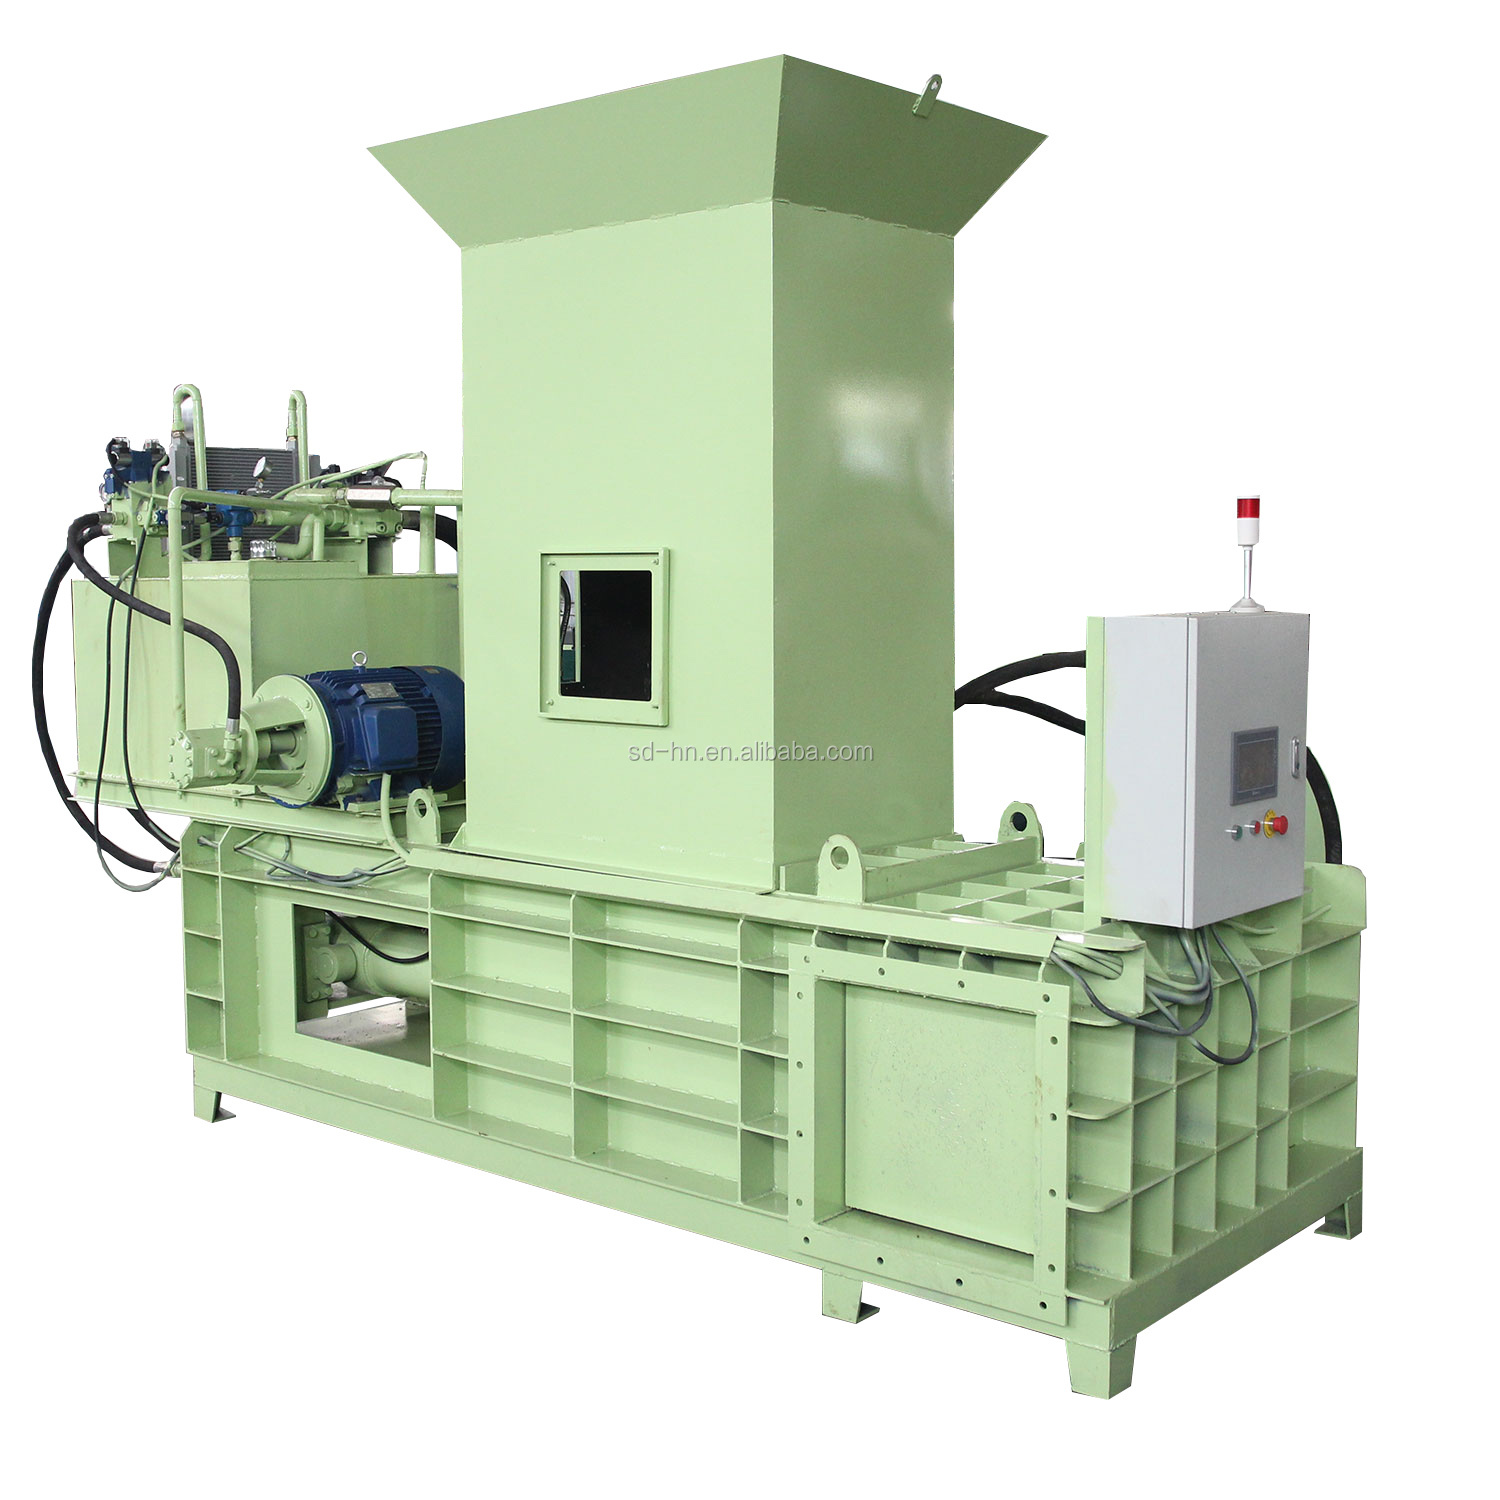 RD Textile fiber horizontal automatic horizontal hydraulic baler Suitable for packing all kinds of fiber Baling machine